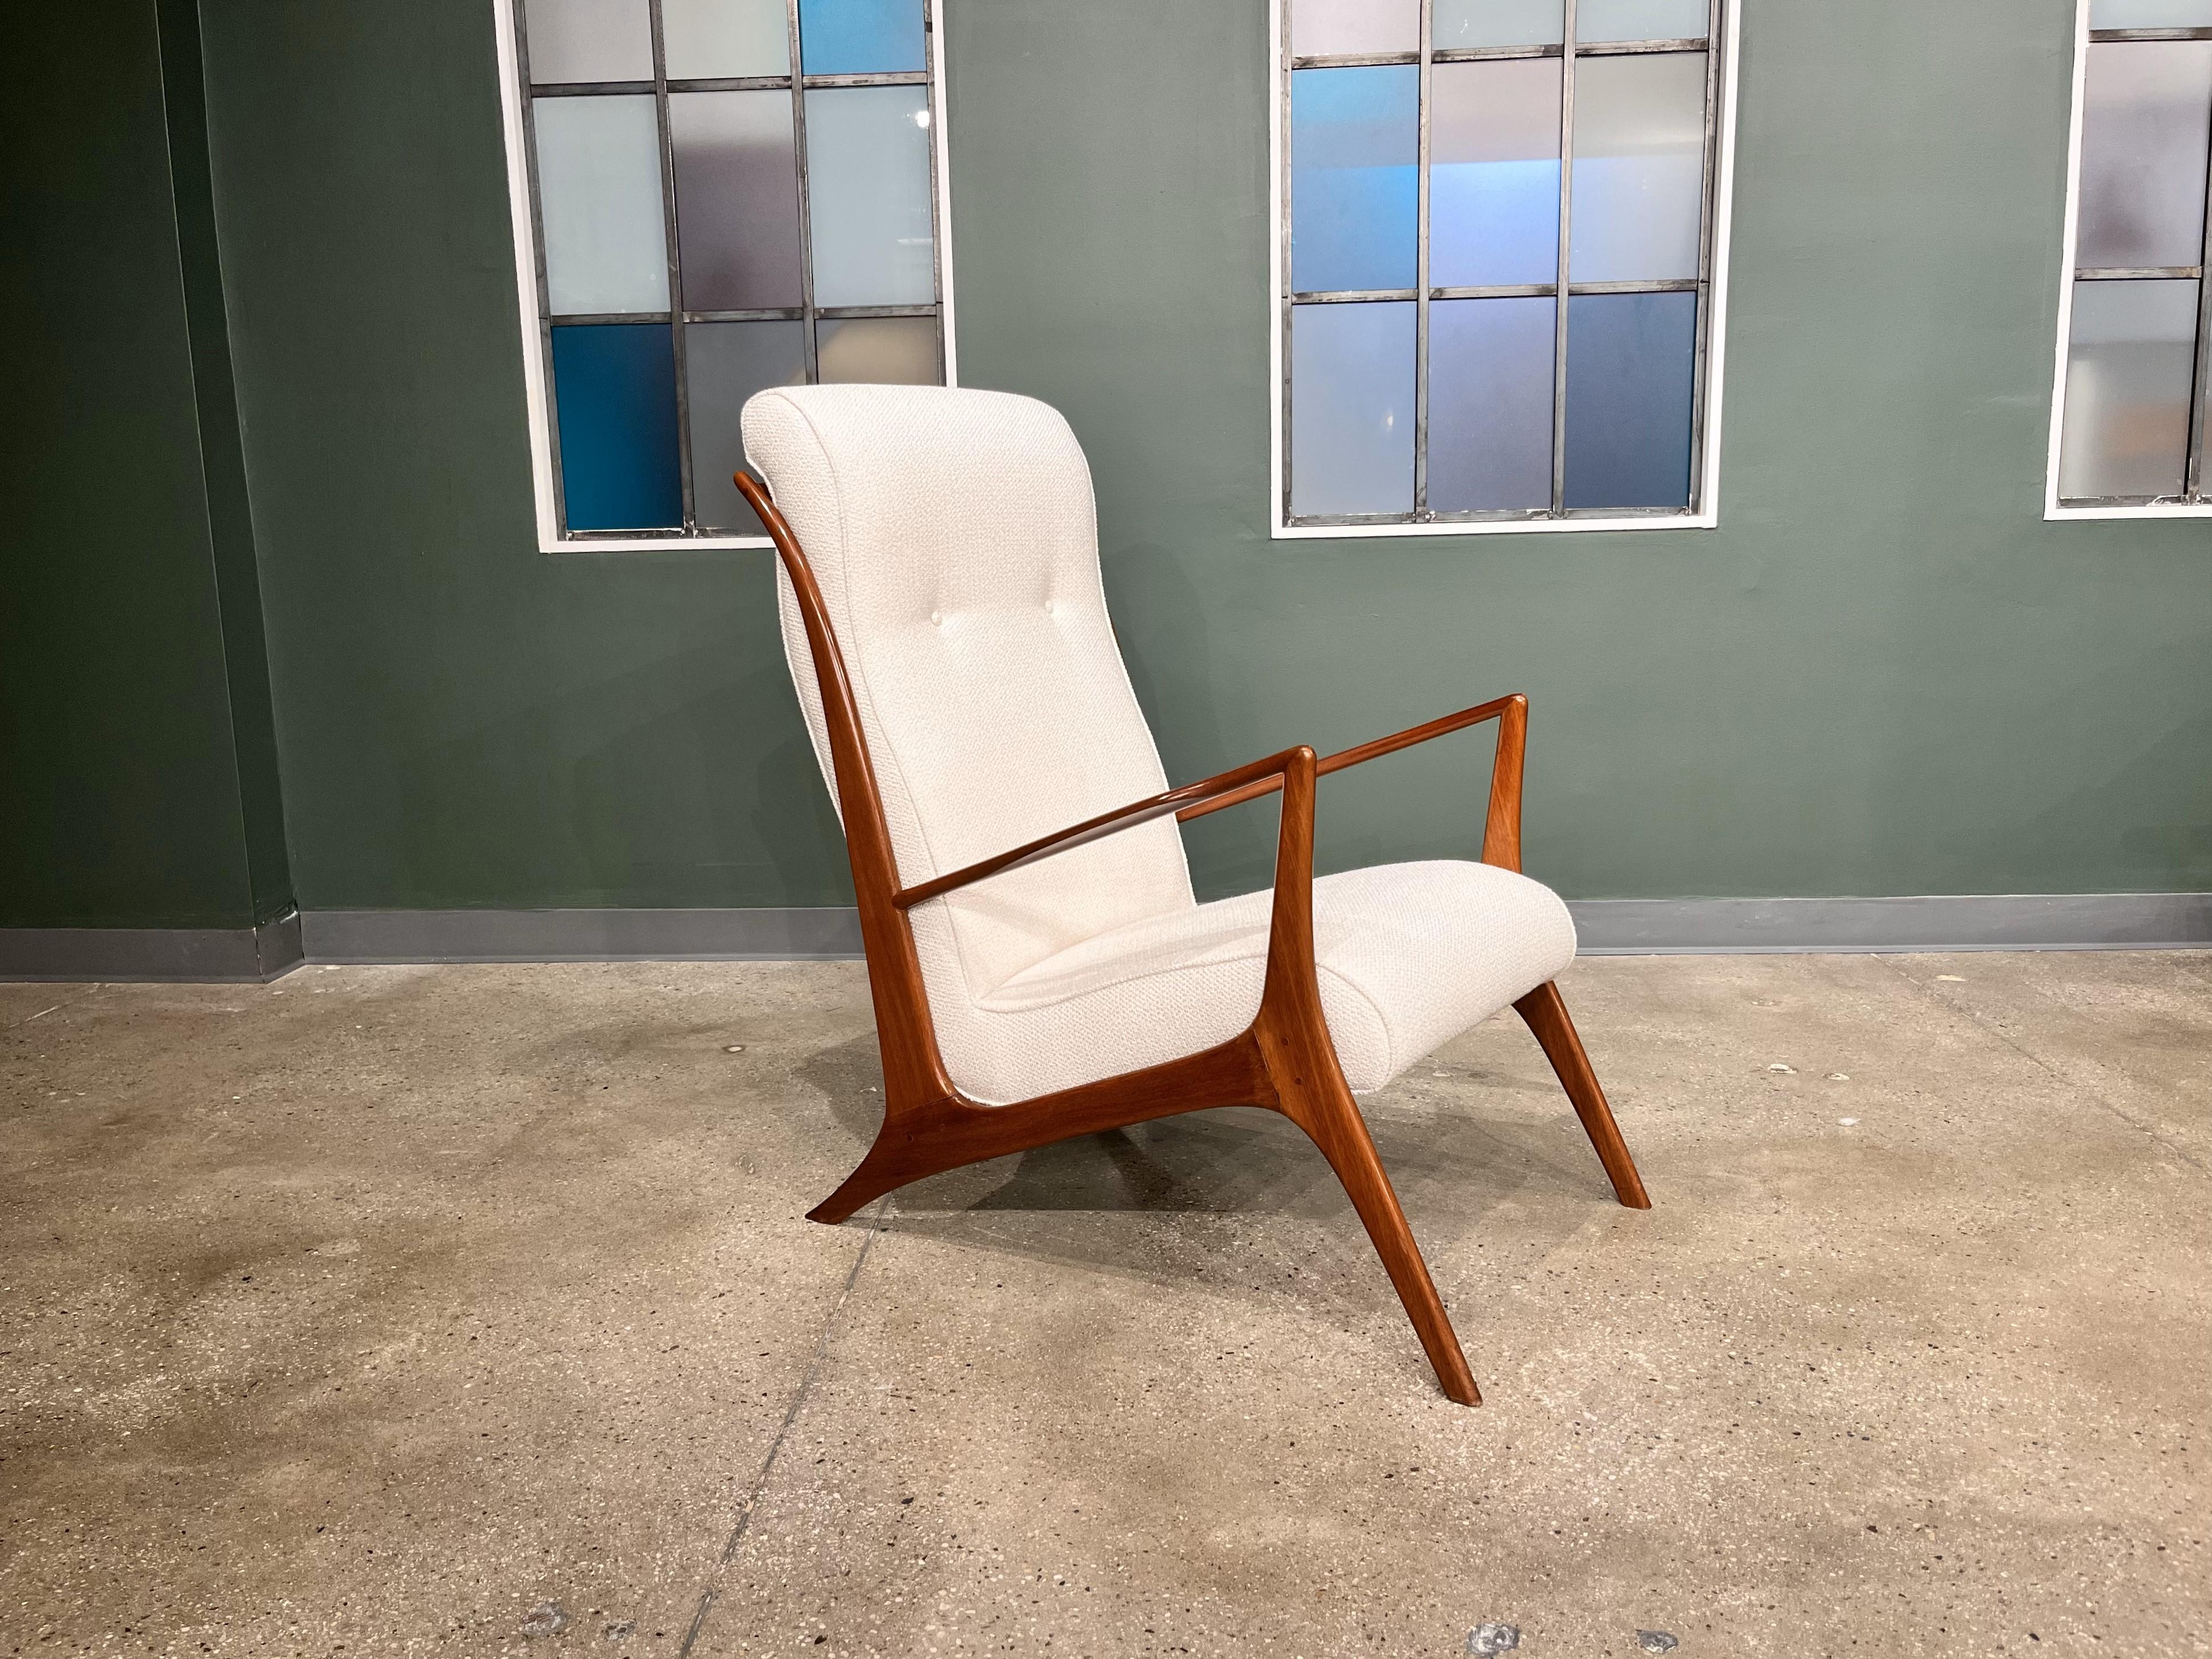 Discover the exquisite mid-century Brazilian modern armchair crafted by John Graz in the 1950s, available today! This stunning chair showcases a caviuna hardwood frame and a comfortable Beige Bouclé  seat. Boasting a low seat and an ergonomically